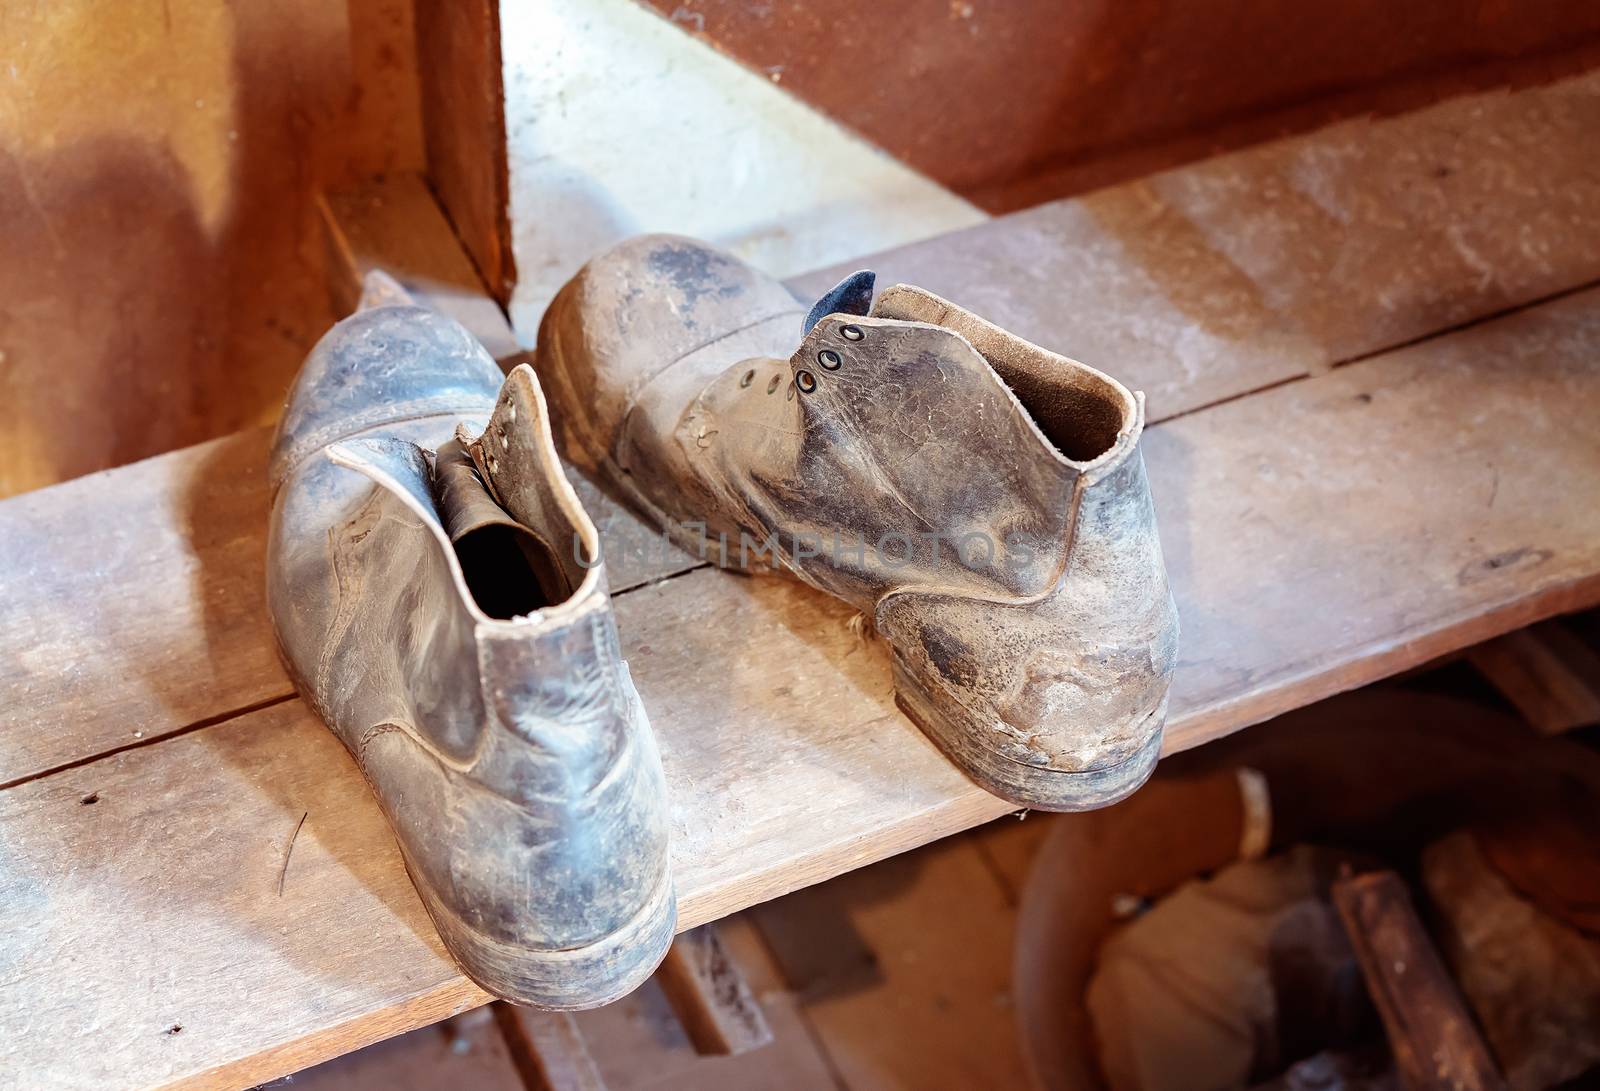 A pair of very old work boots as worn by gold miners during the early gold rush days in Victoria Australia